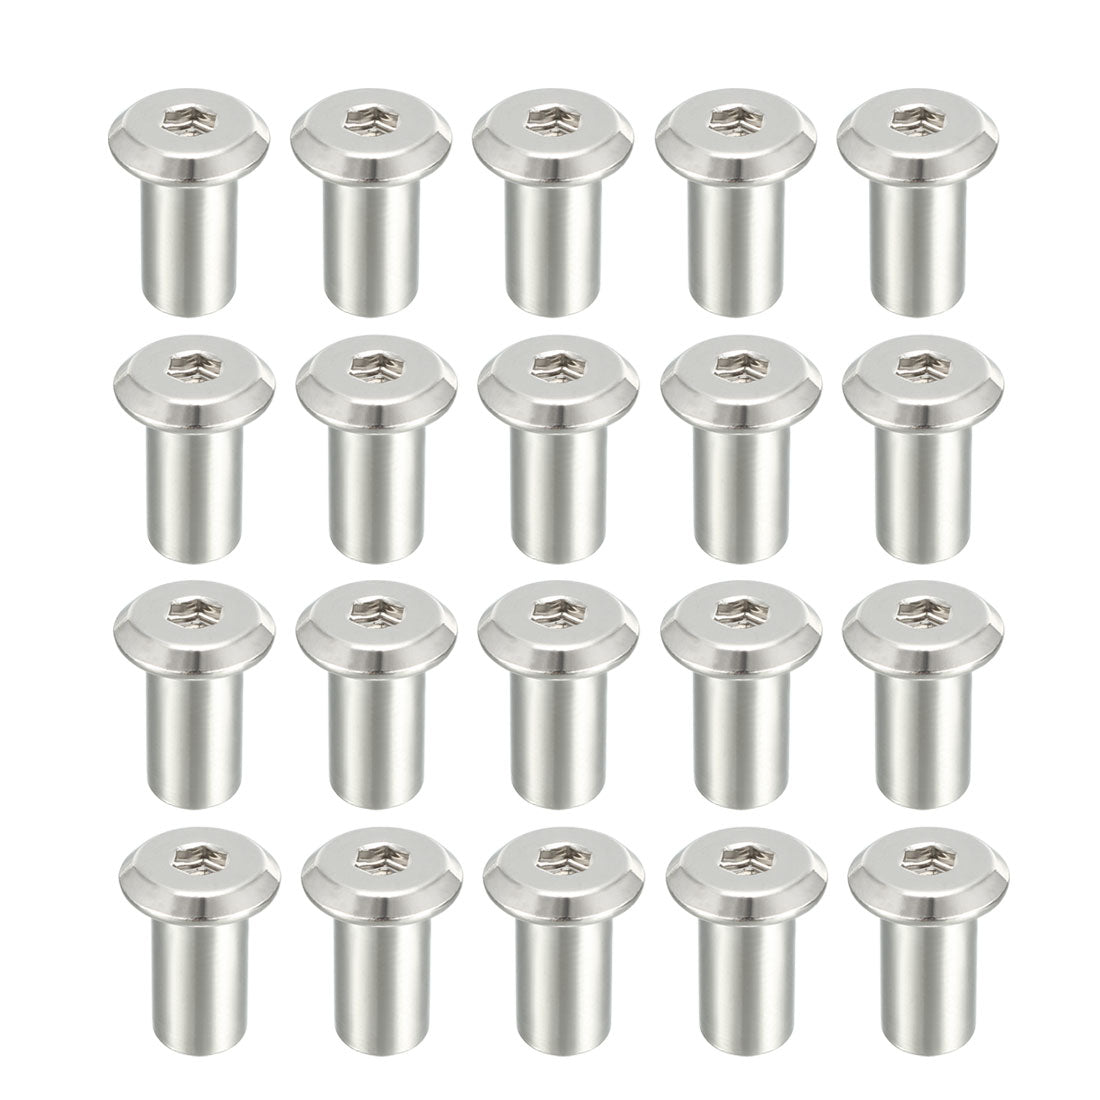 uxcell Uxcell M6x15mm Hex Socket Head Insert Nut Screw Post Sleeve Nut for Furniture 20pcs